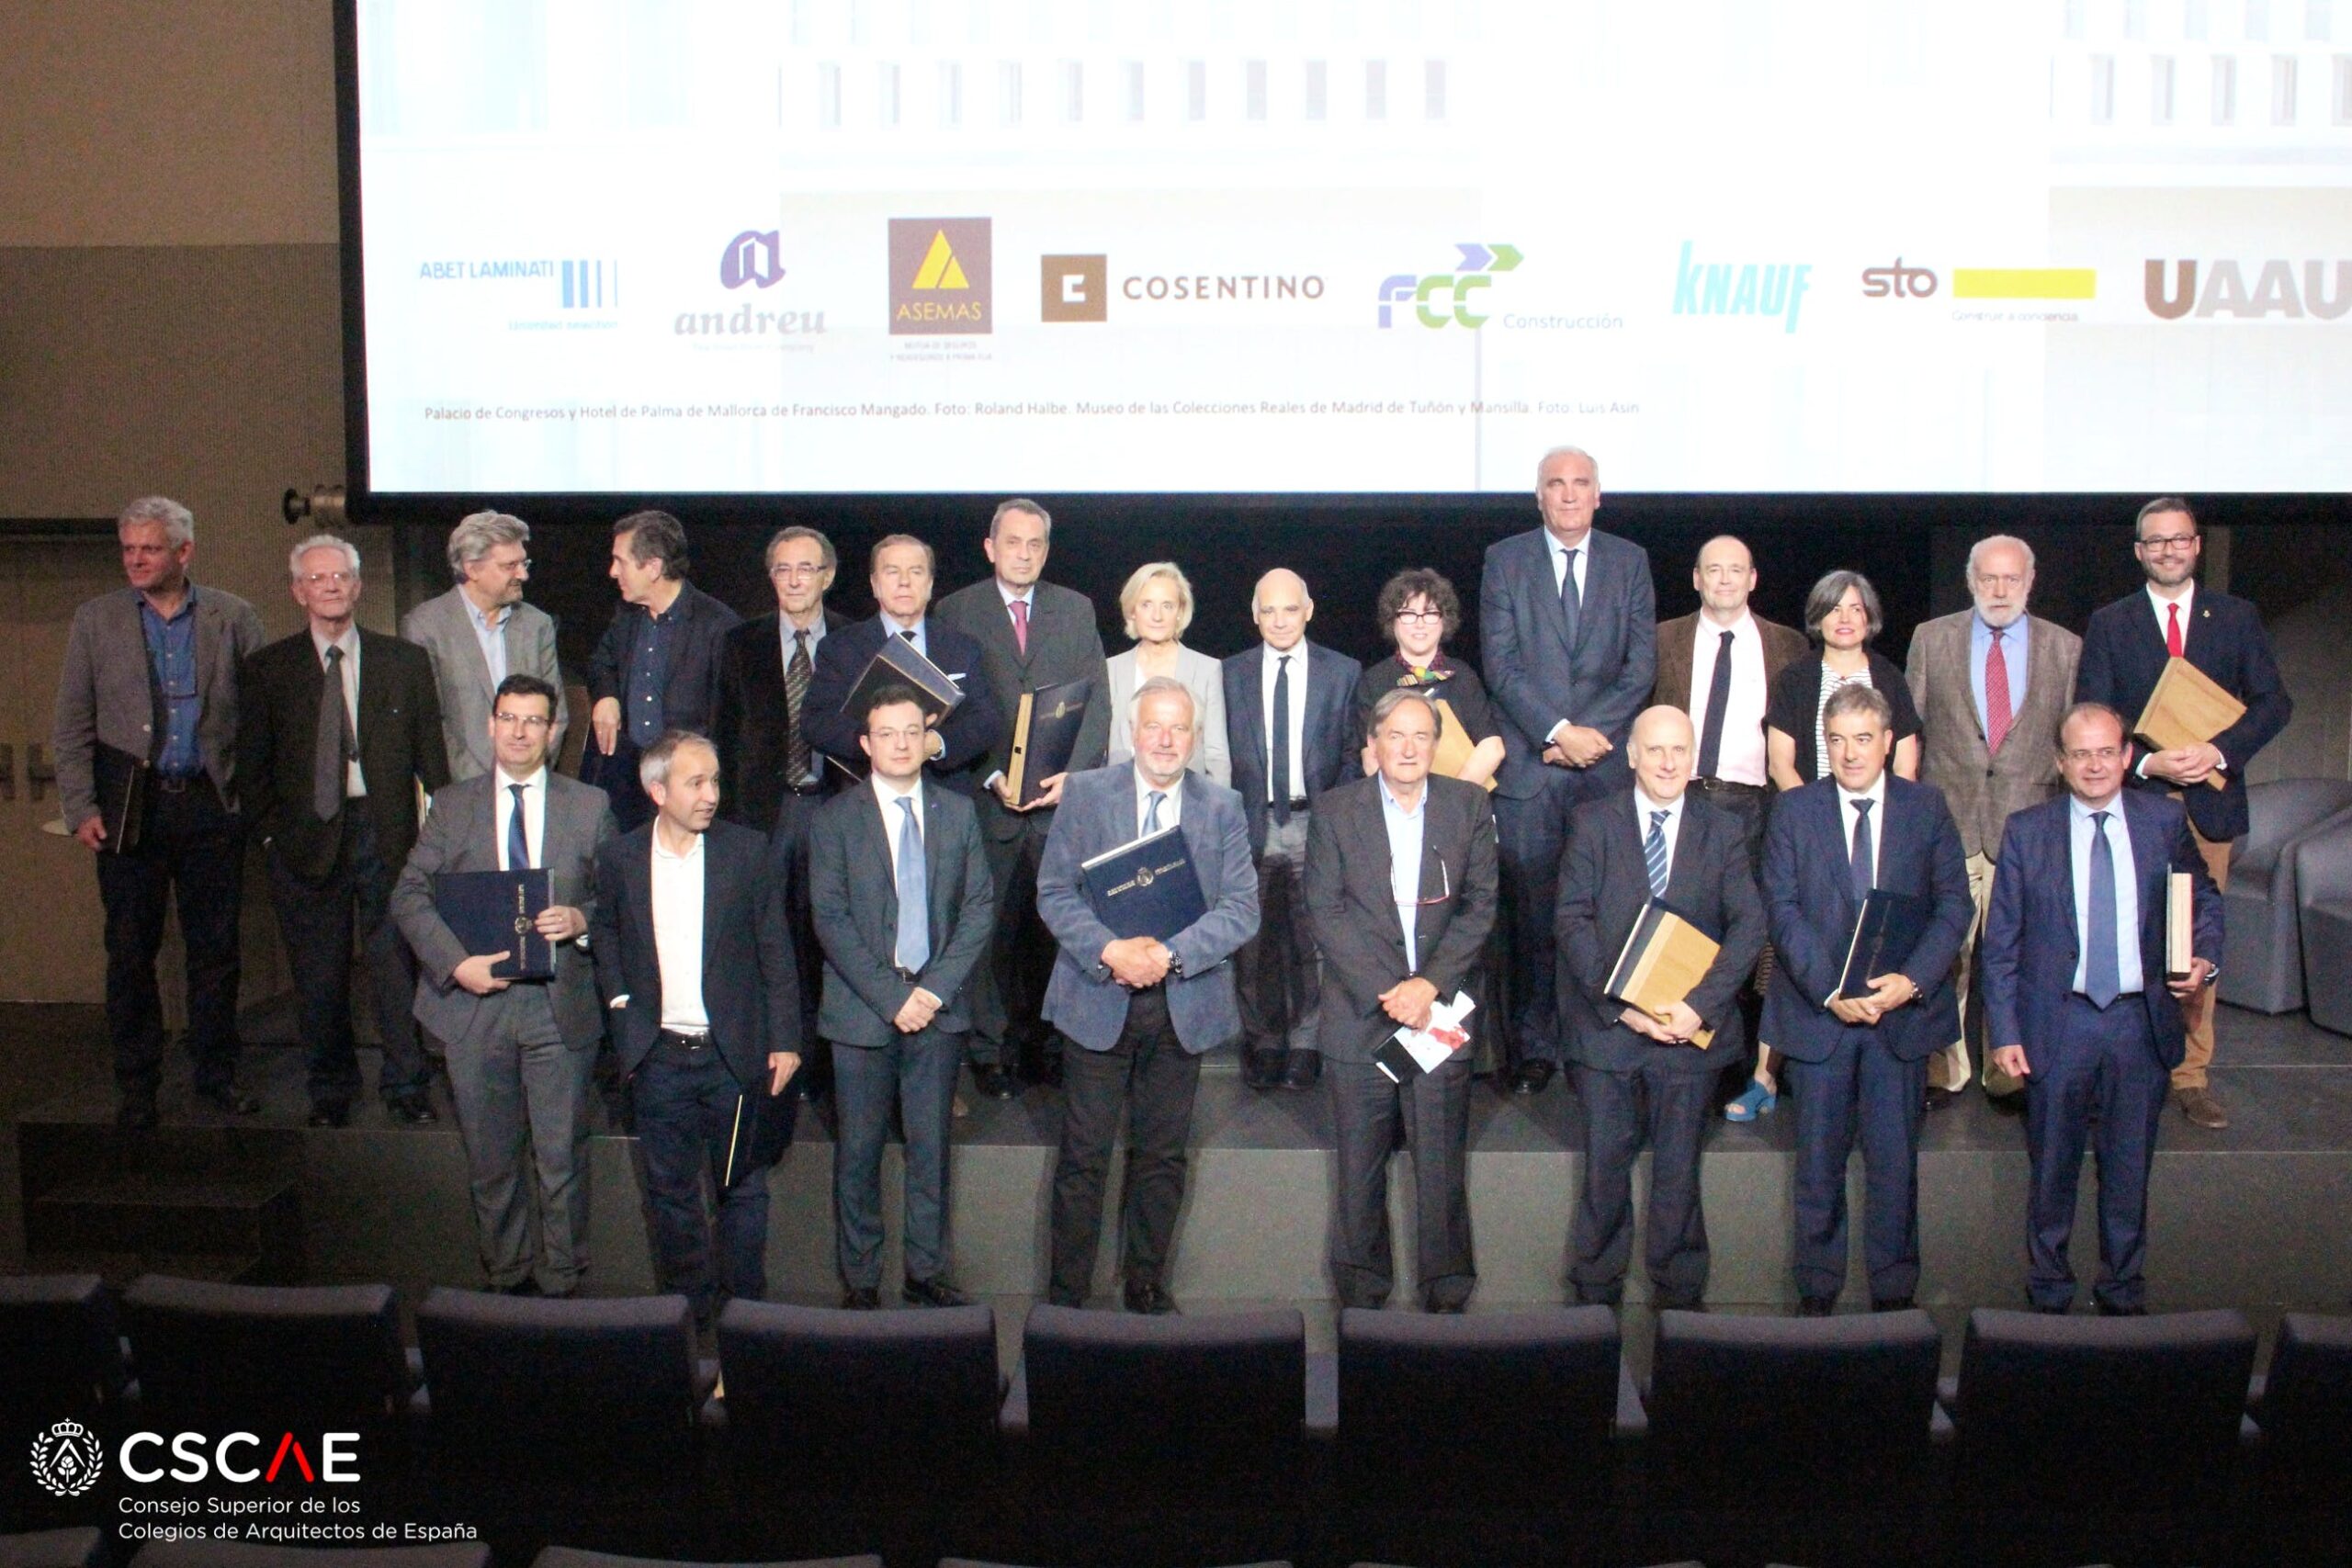 Image of Foto familia premiados Acto Premios PAE y PUE Wanda b 1 scaled in Cosentino in the celebration of Spanish architecture and urban planning - Cosentino